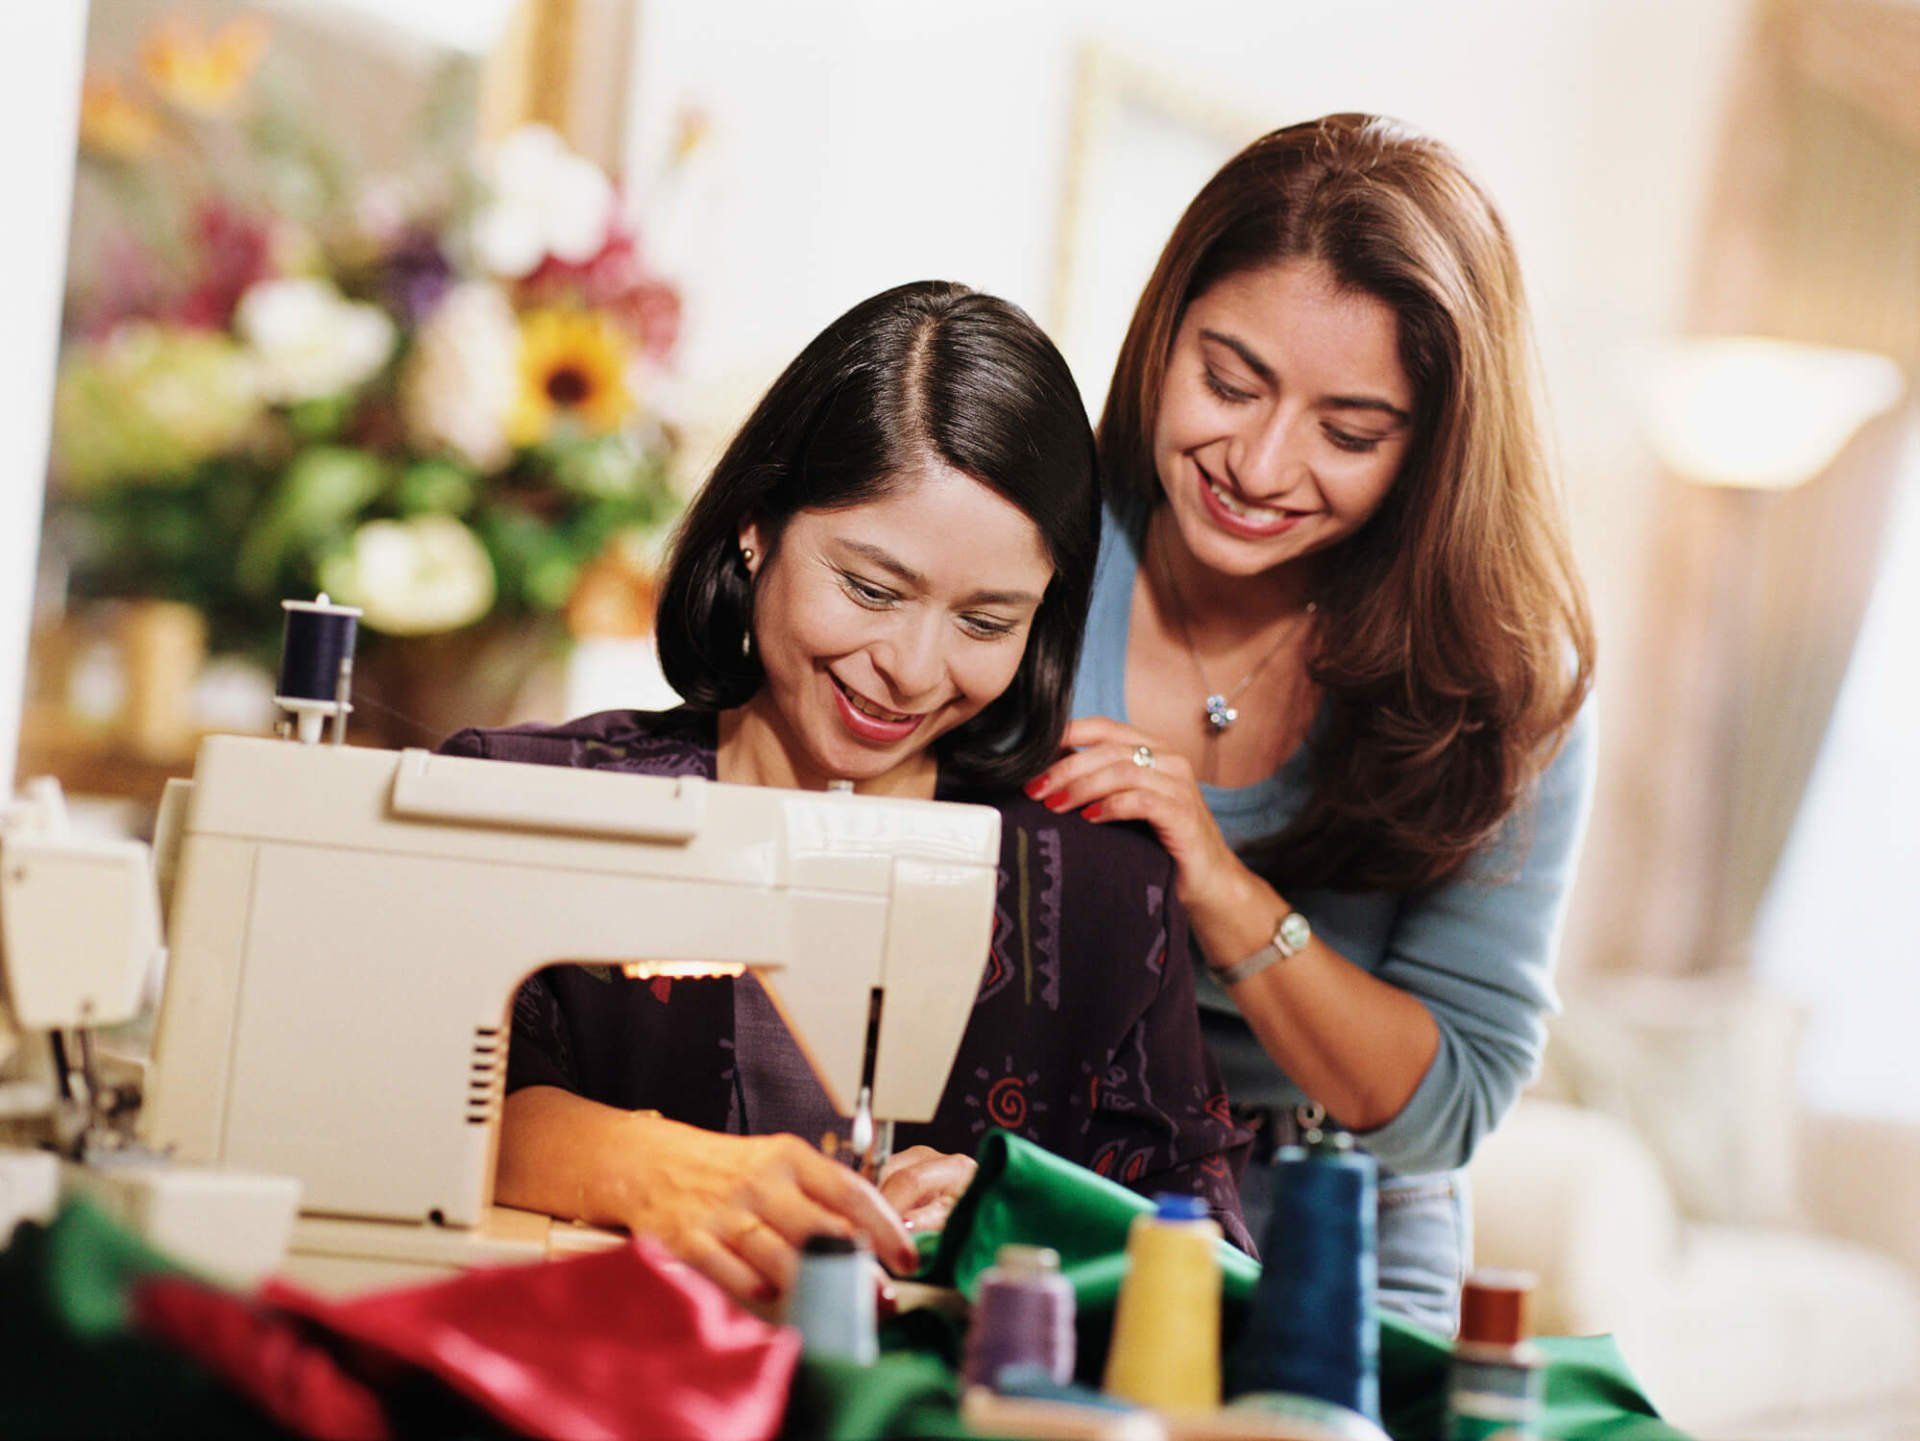 Commercial sewing machines - Sewing services in Nashua, NH